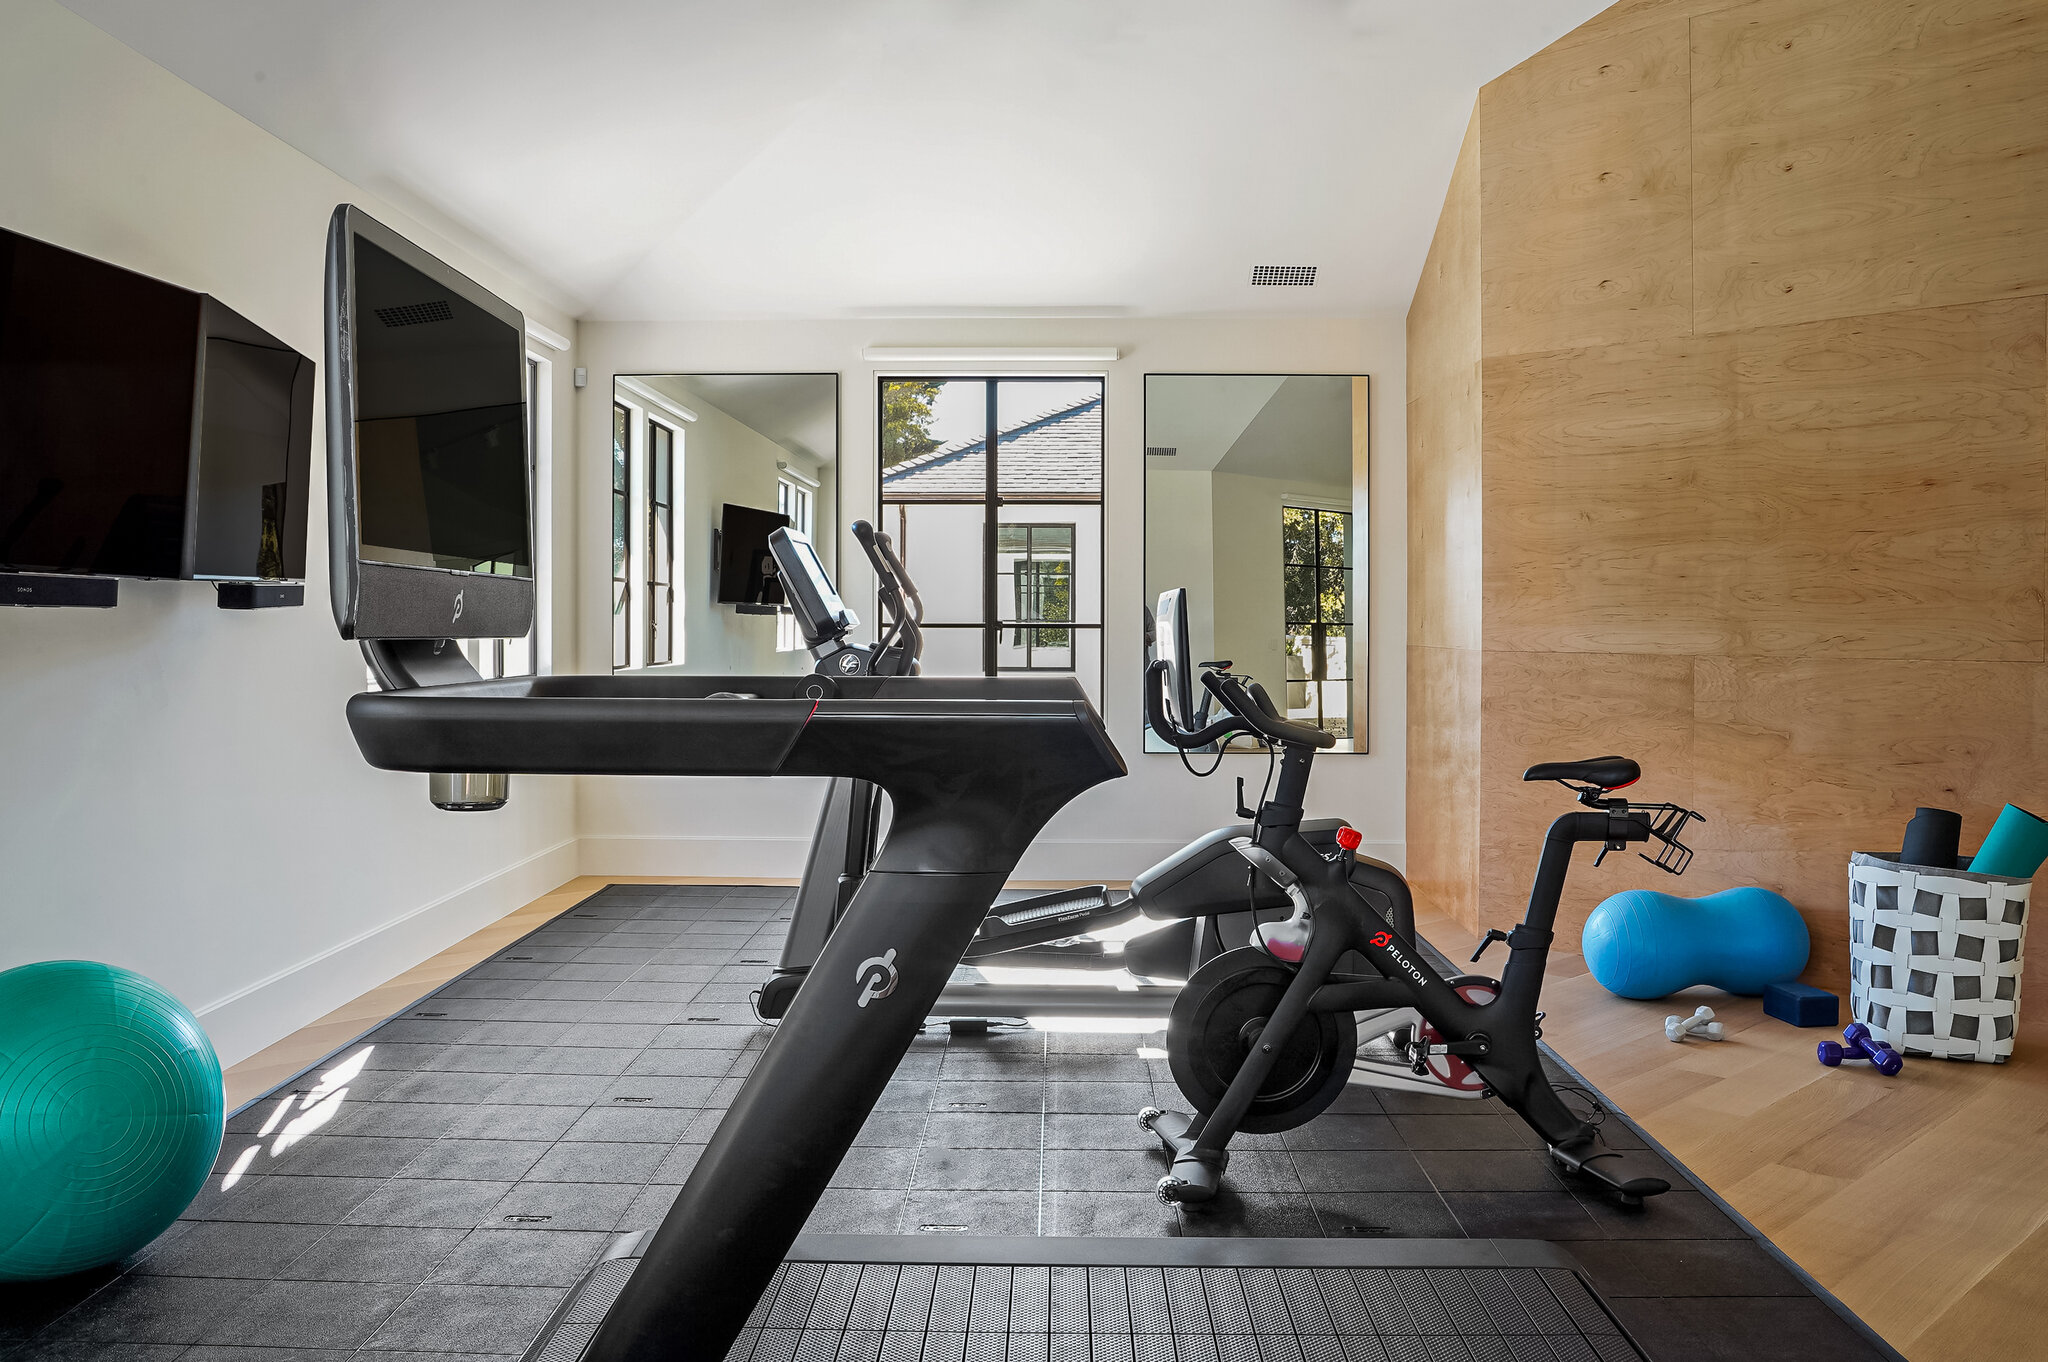 Is It Necessary To Have A Dedicated Space For A Home Gym, Or Can It Be In A Shared Area?